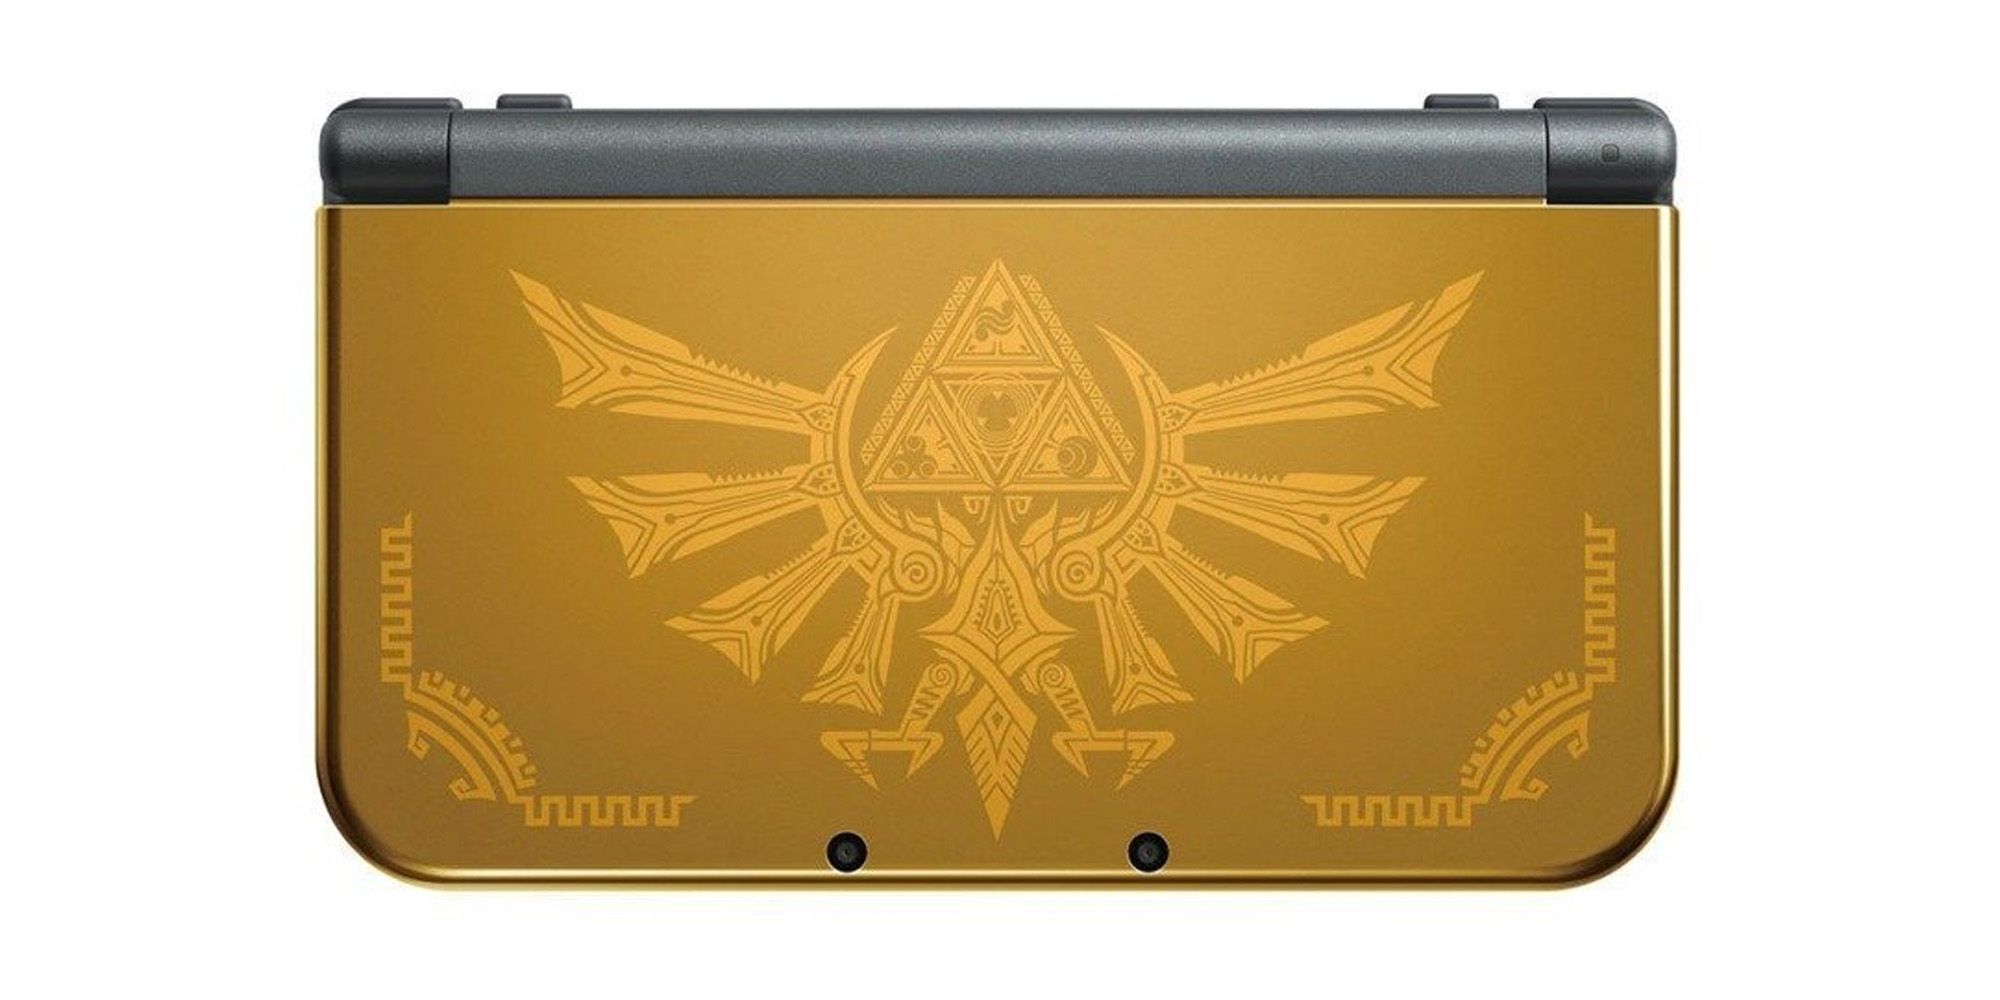 New 3DS XL with gold exterior featuring an intricate image of the Hylian Crest.